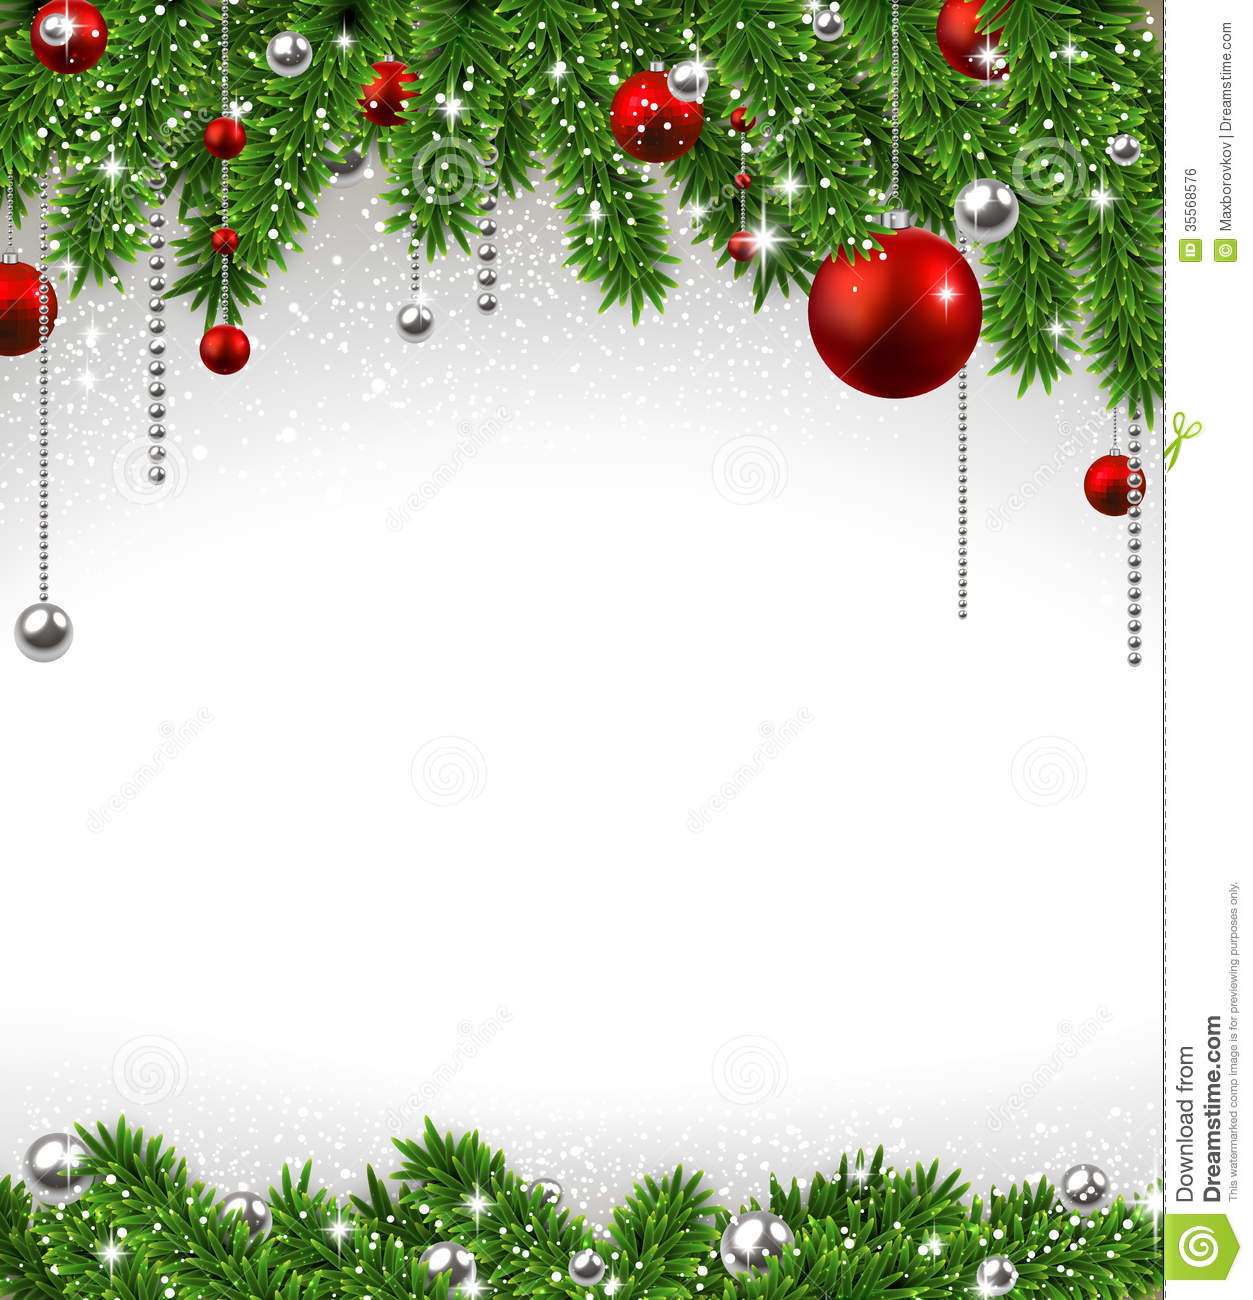 Christmas background vector free download for windows 10